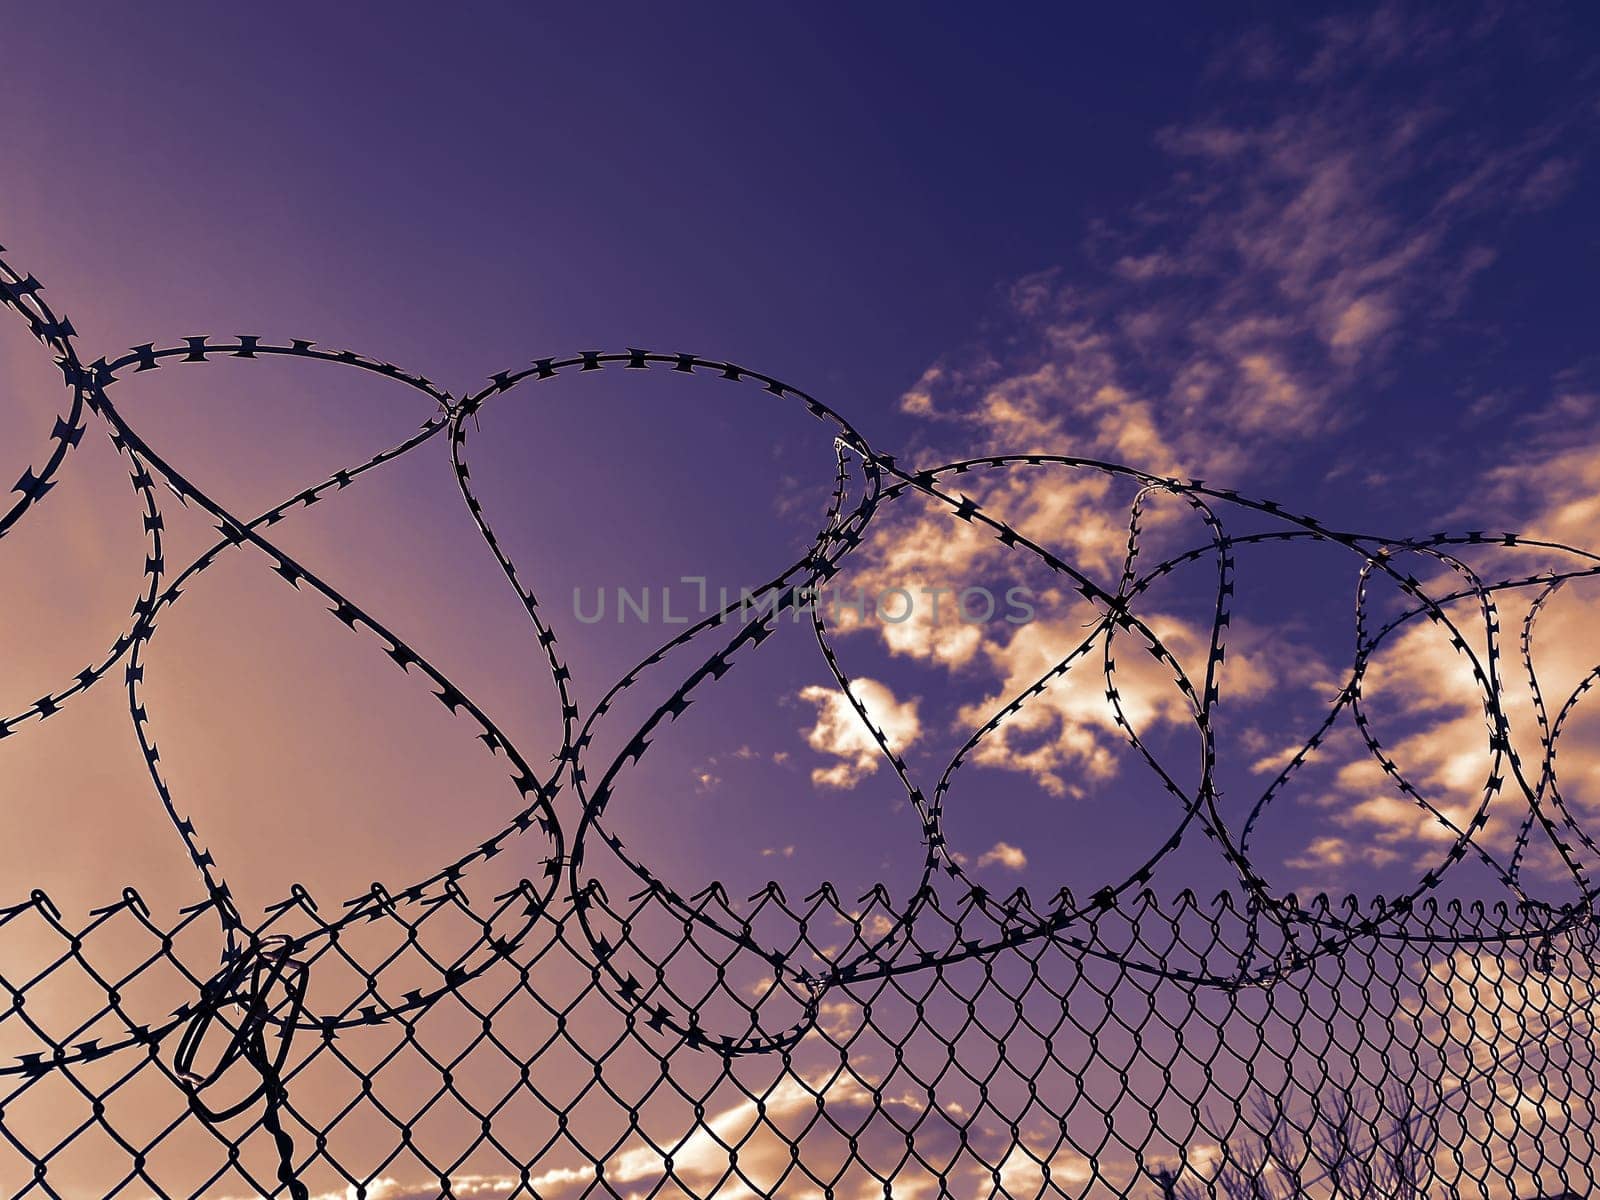 Barbed wire fence. Stretched and wound metal wire. Concept of injustice, prison, restriction of rights and freedoms. by Proxima13